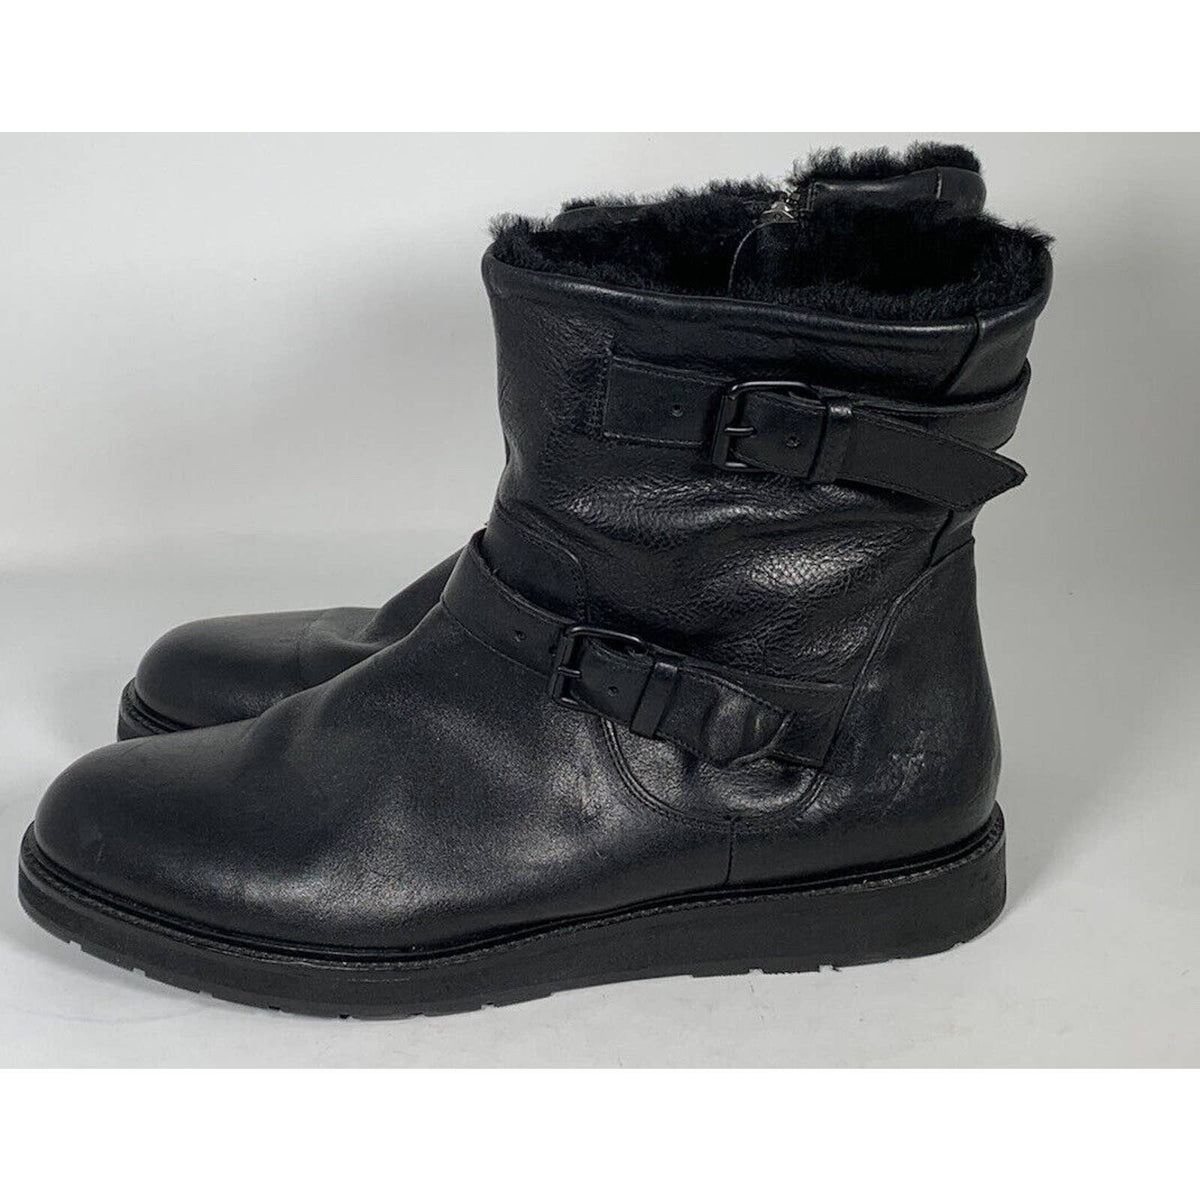 Vince Mens Black Leather Shearling Boots Sz. 12 M